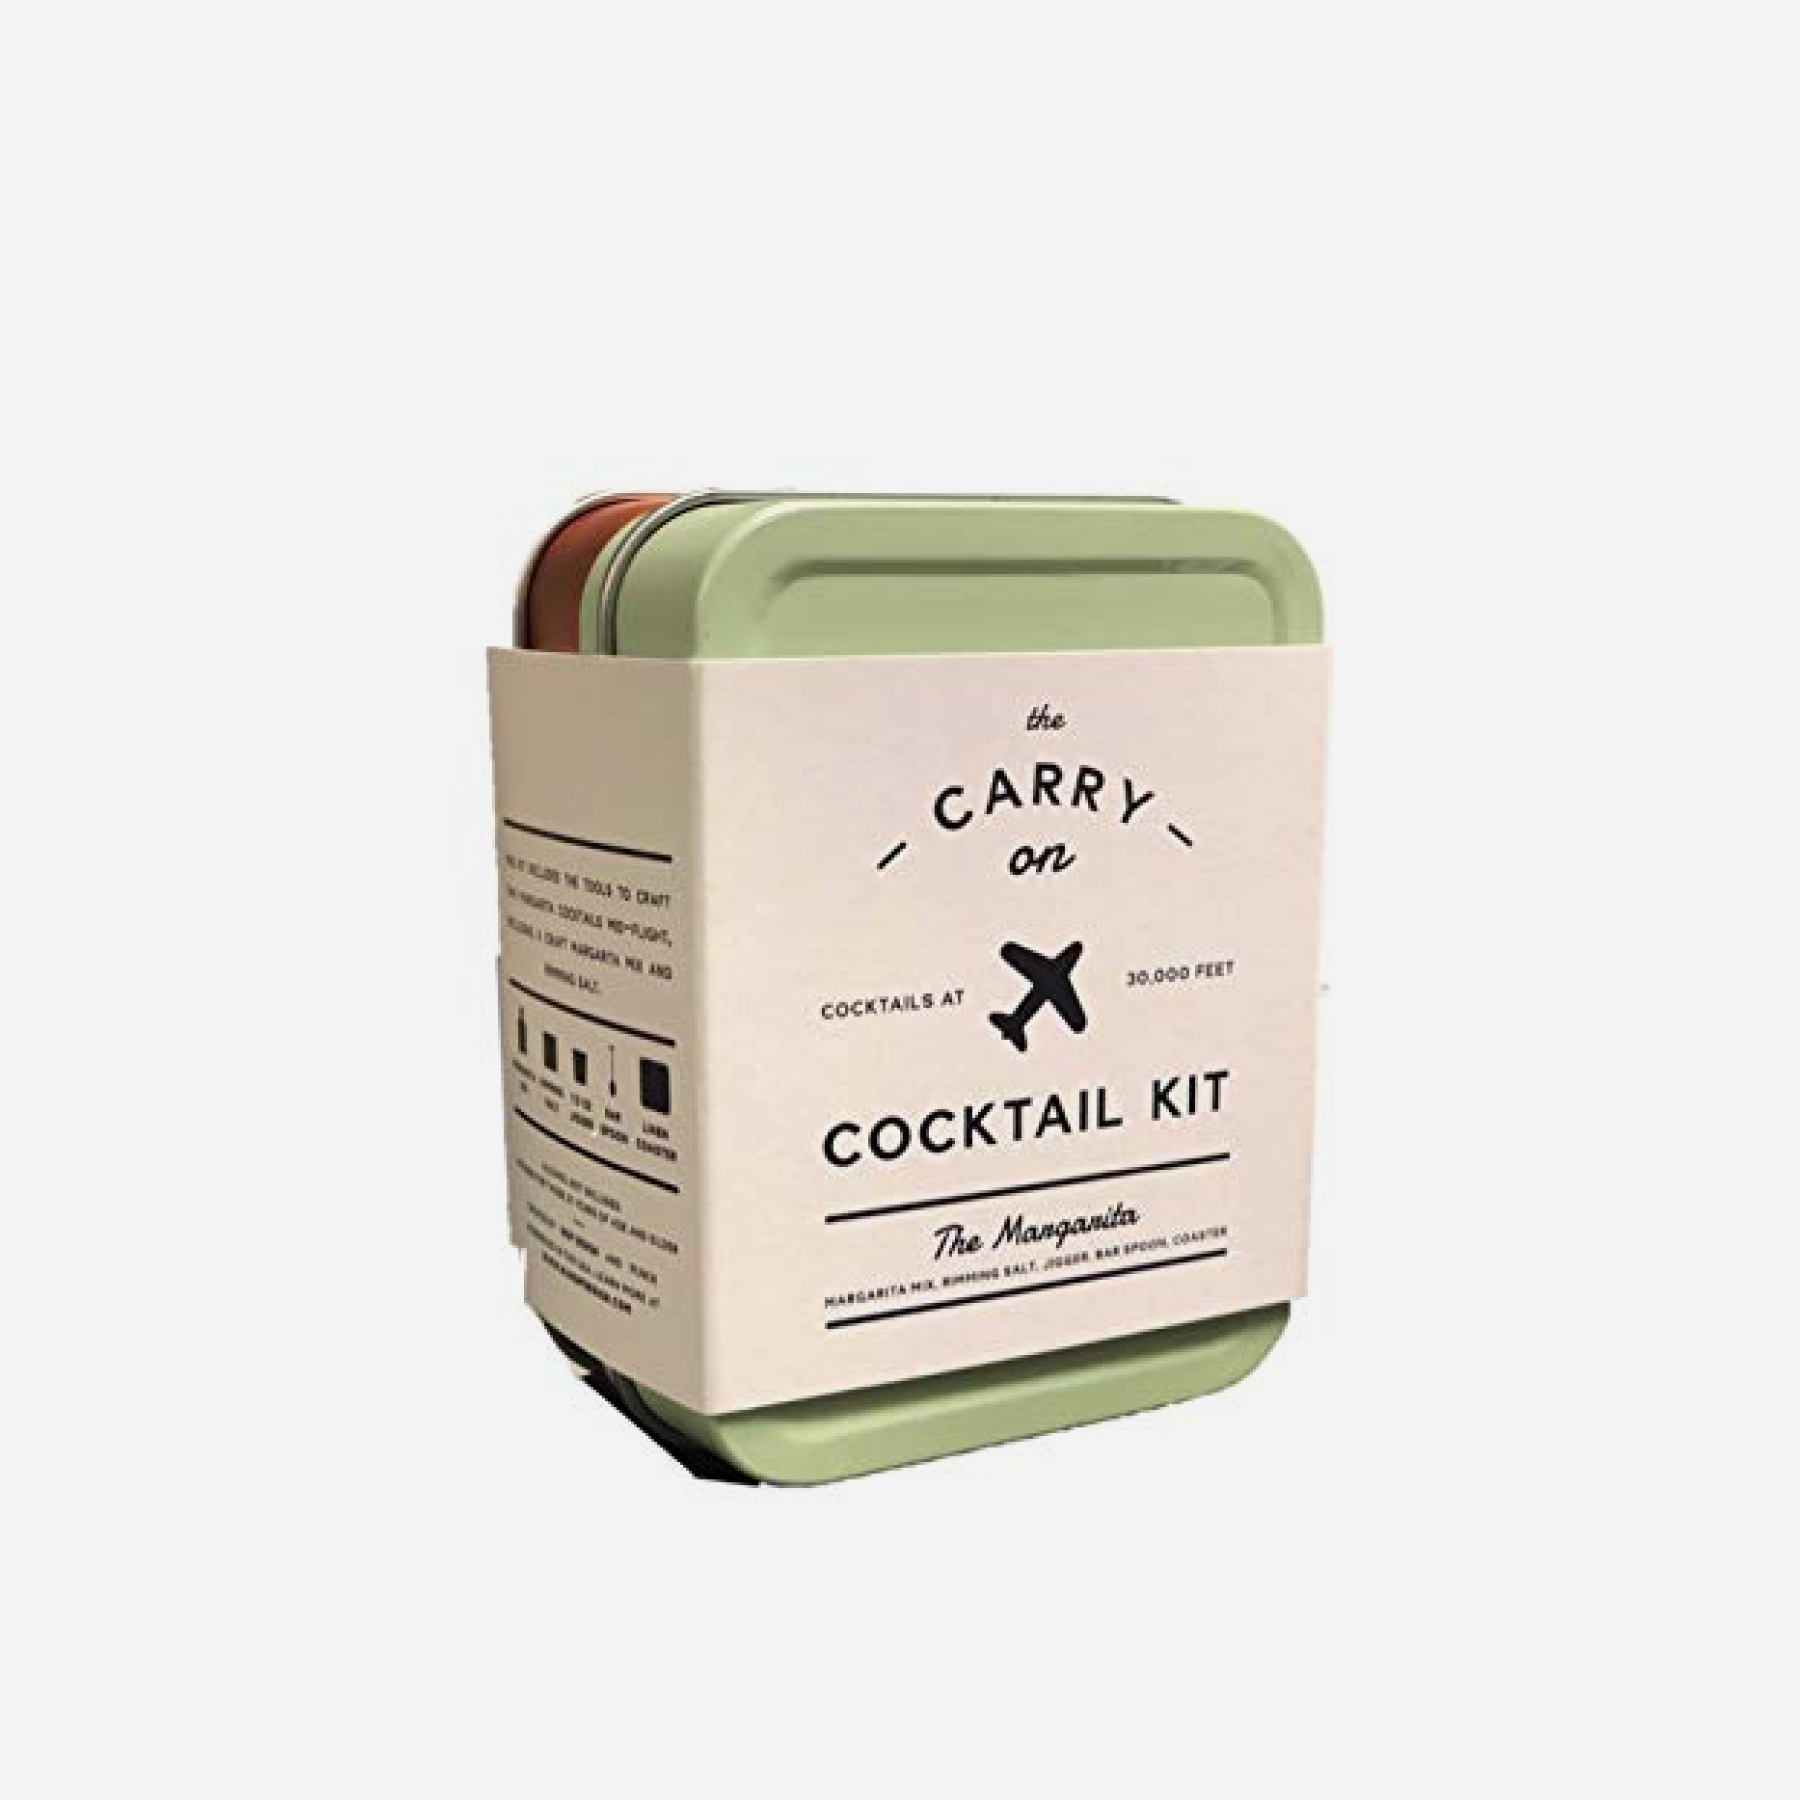 ALL-SORTS-OF-CARRY-ON-COCKTAIL-KIT